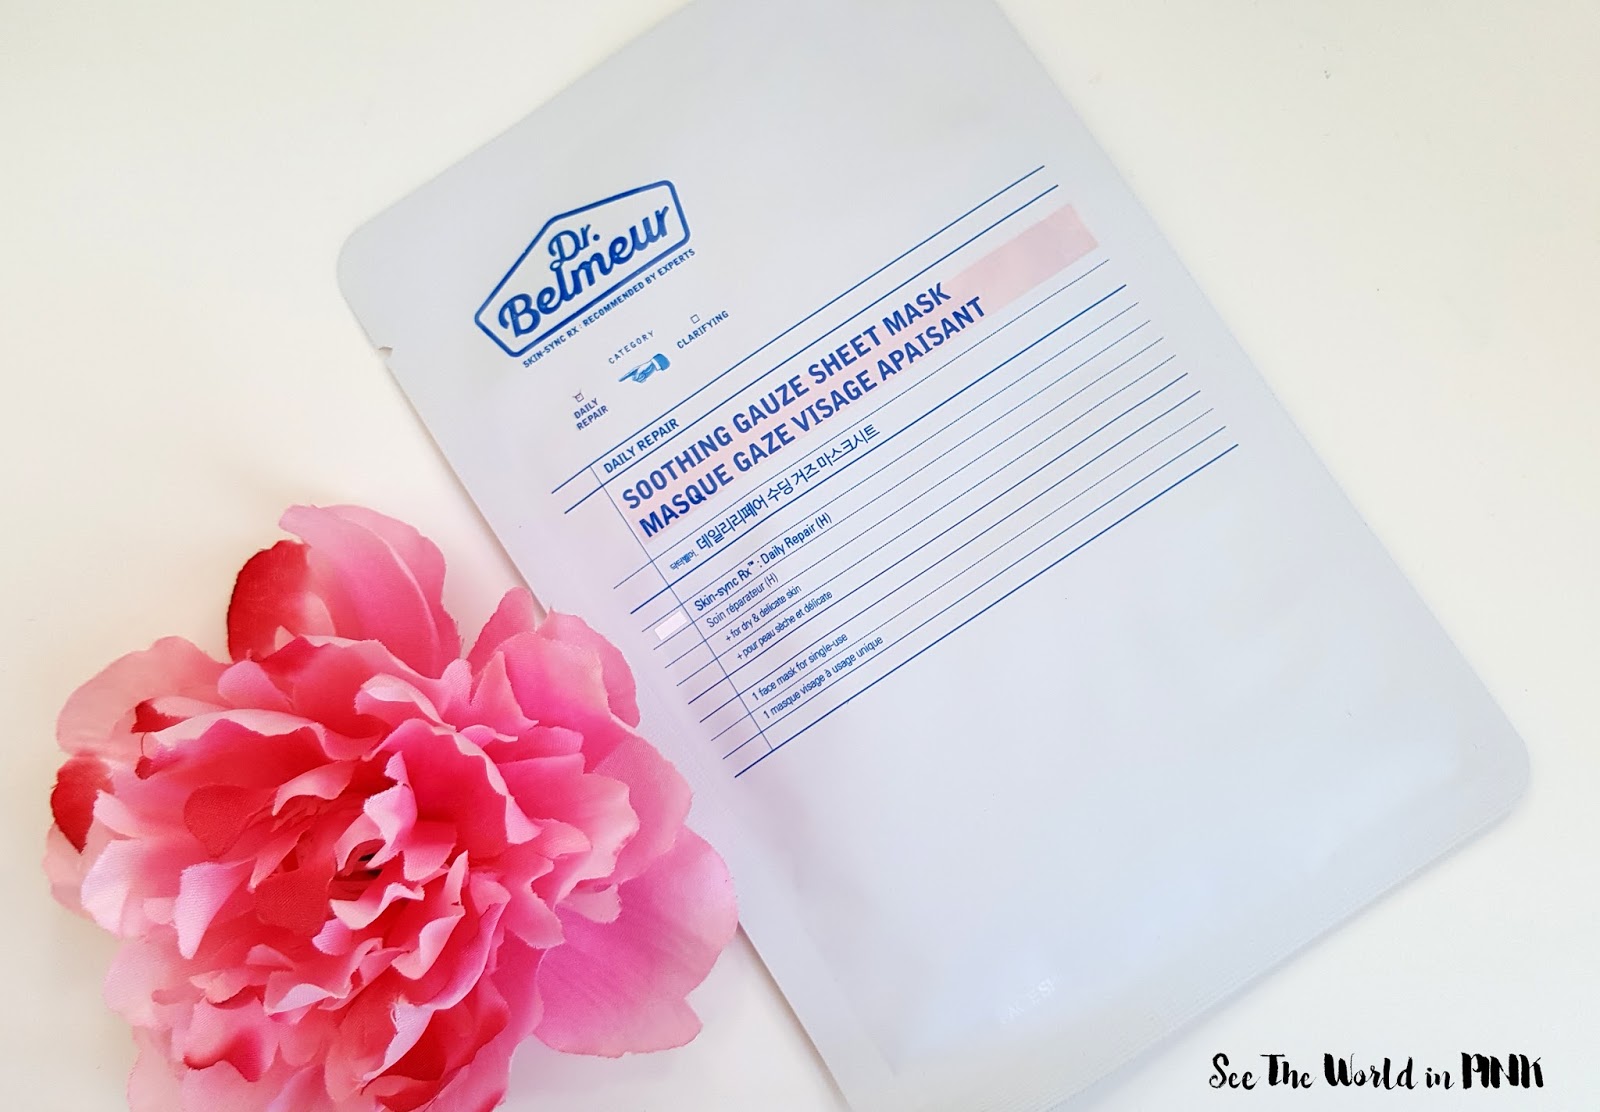 Mask Wednesday - The Face Shop Dr. Belmeur Daily Repair Soothing Gauze Sheet Mask Review